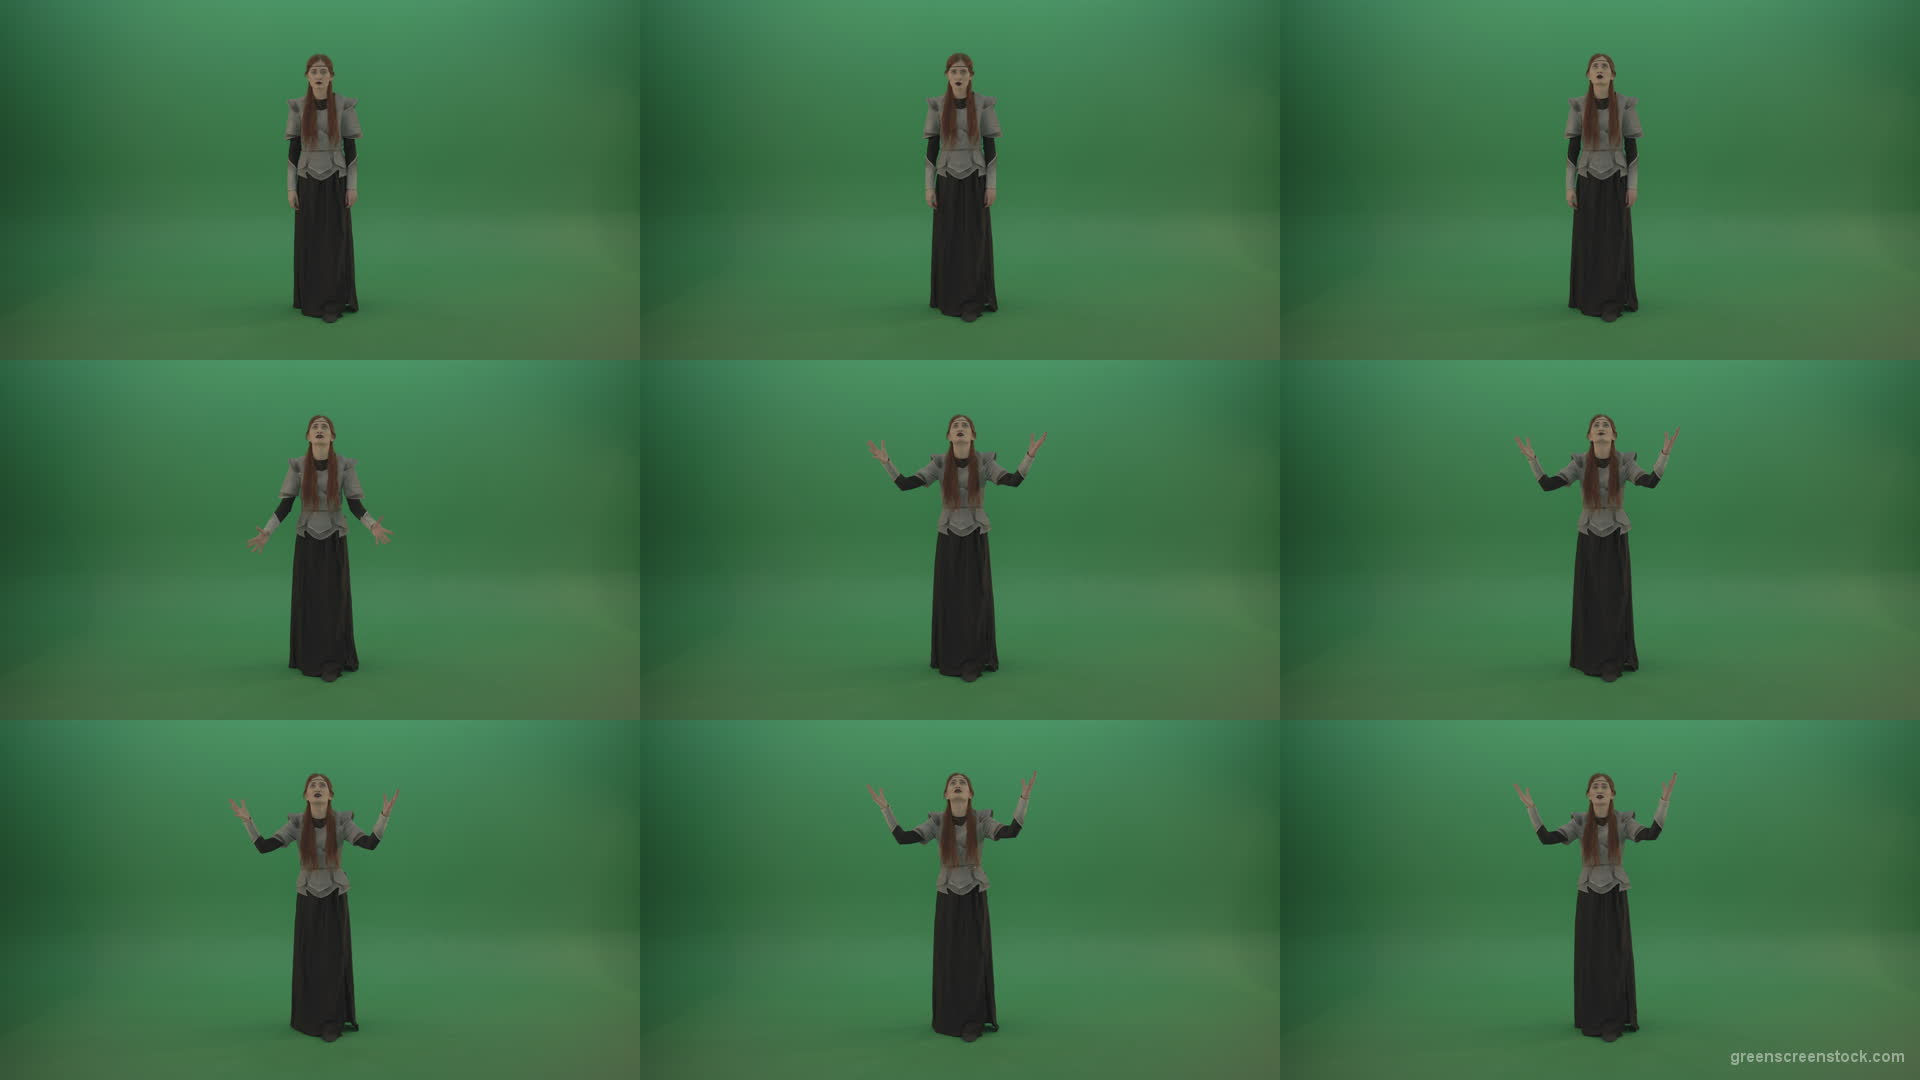 Redheaded-girl-in-full-height-in-medieval-warrior-clothing-asks-for-help-from-the-gods-on-green-screen Green Screen Stock